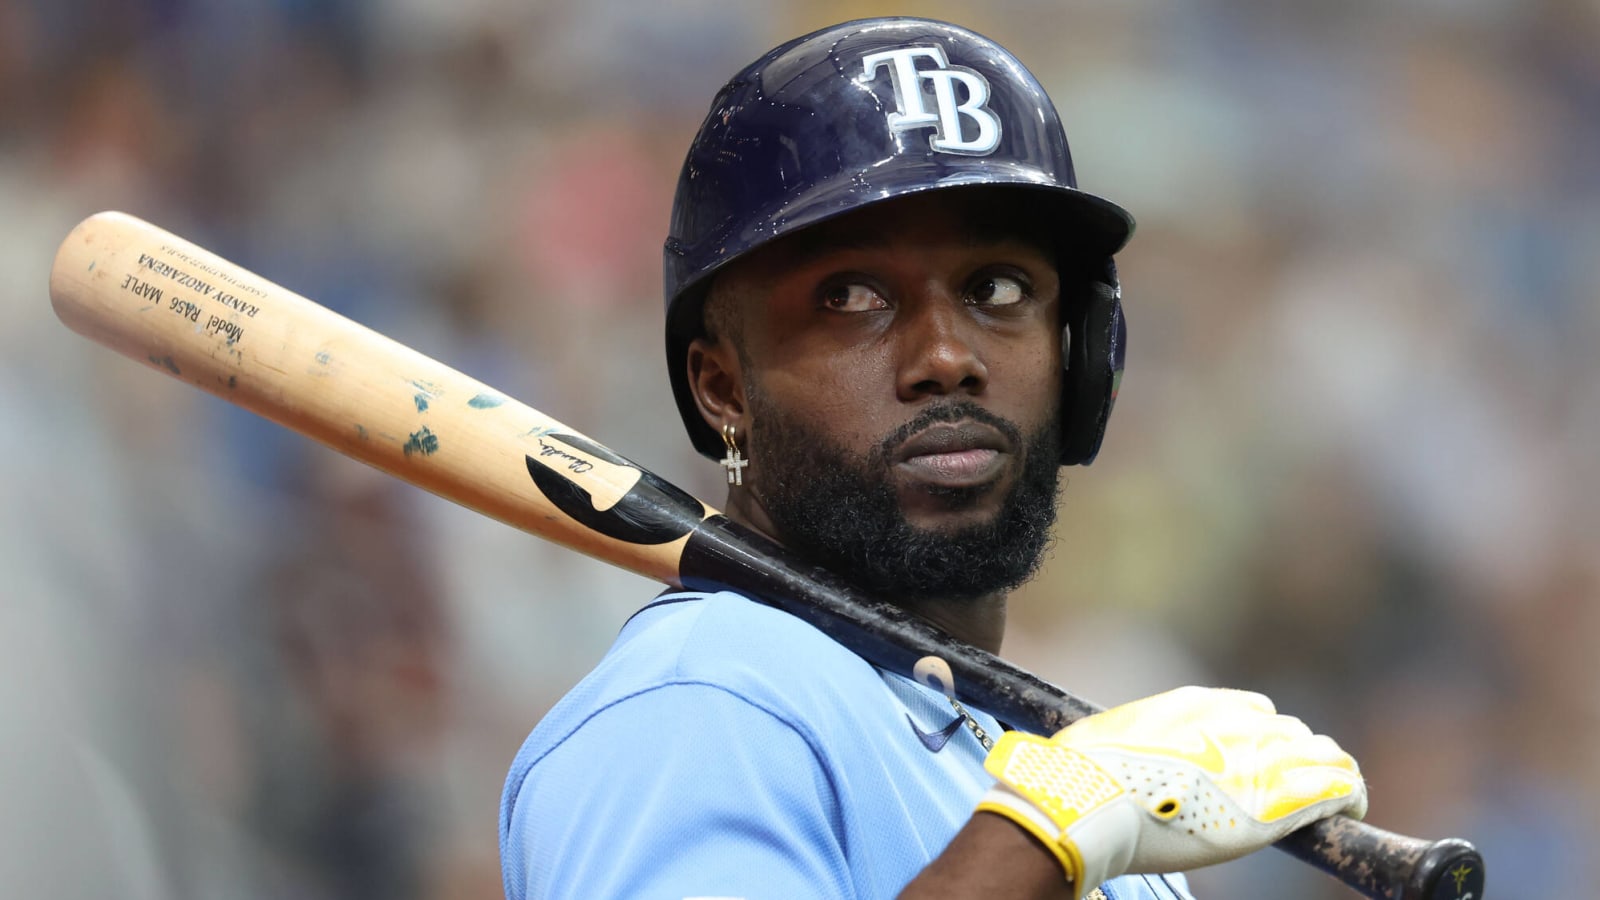 Best Rays players by uniform number